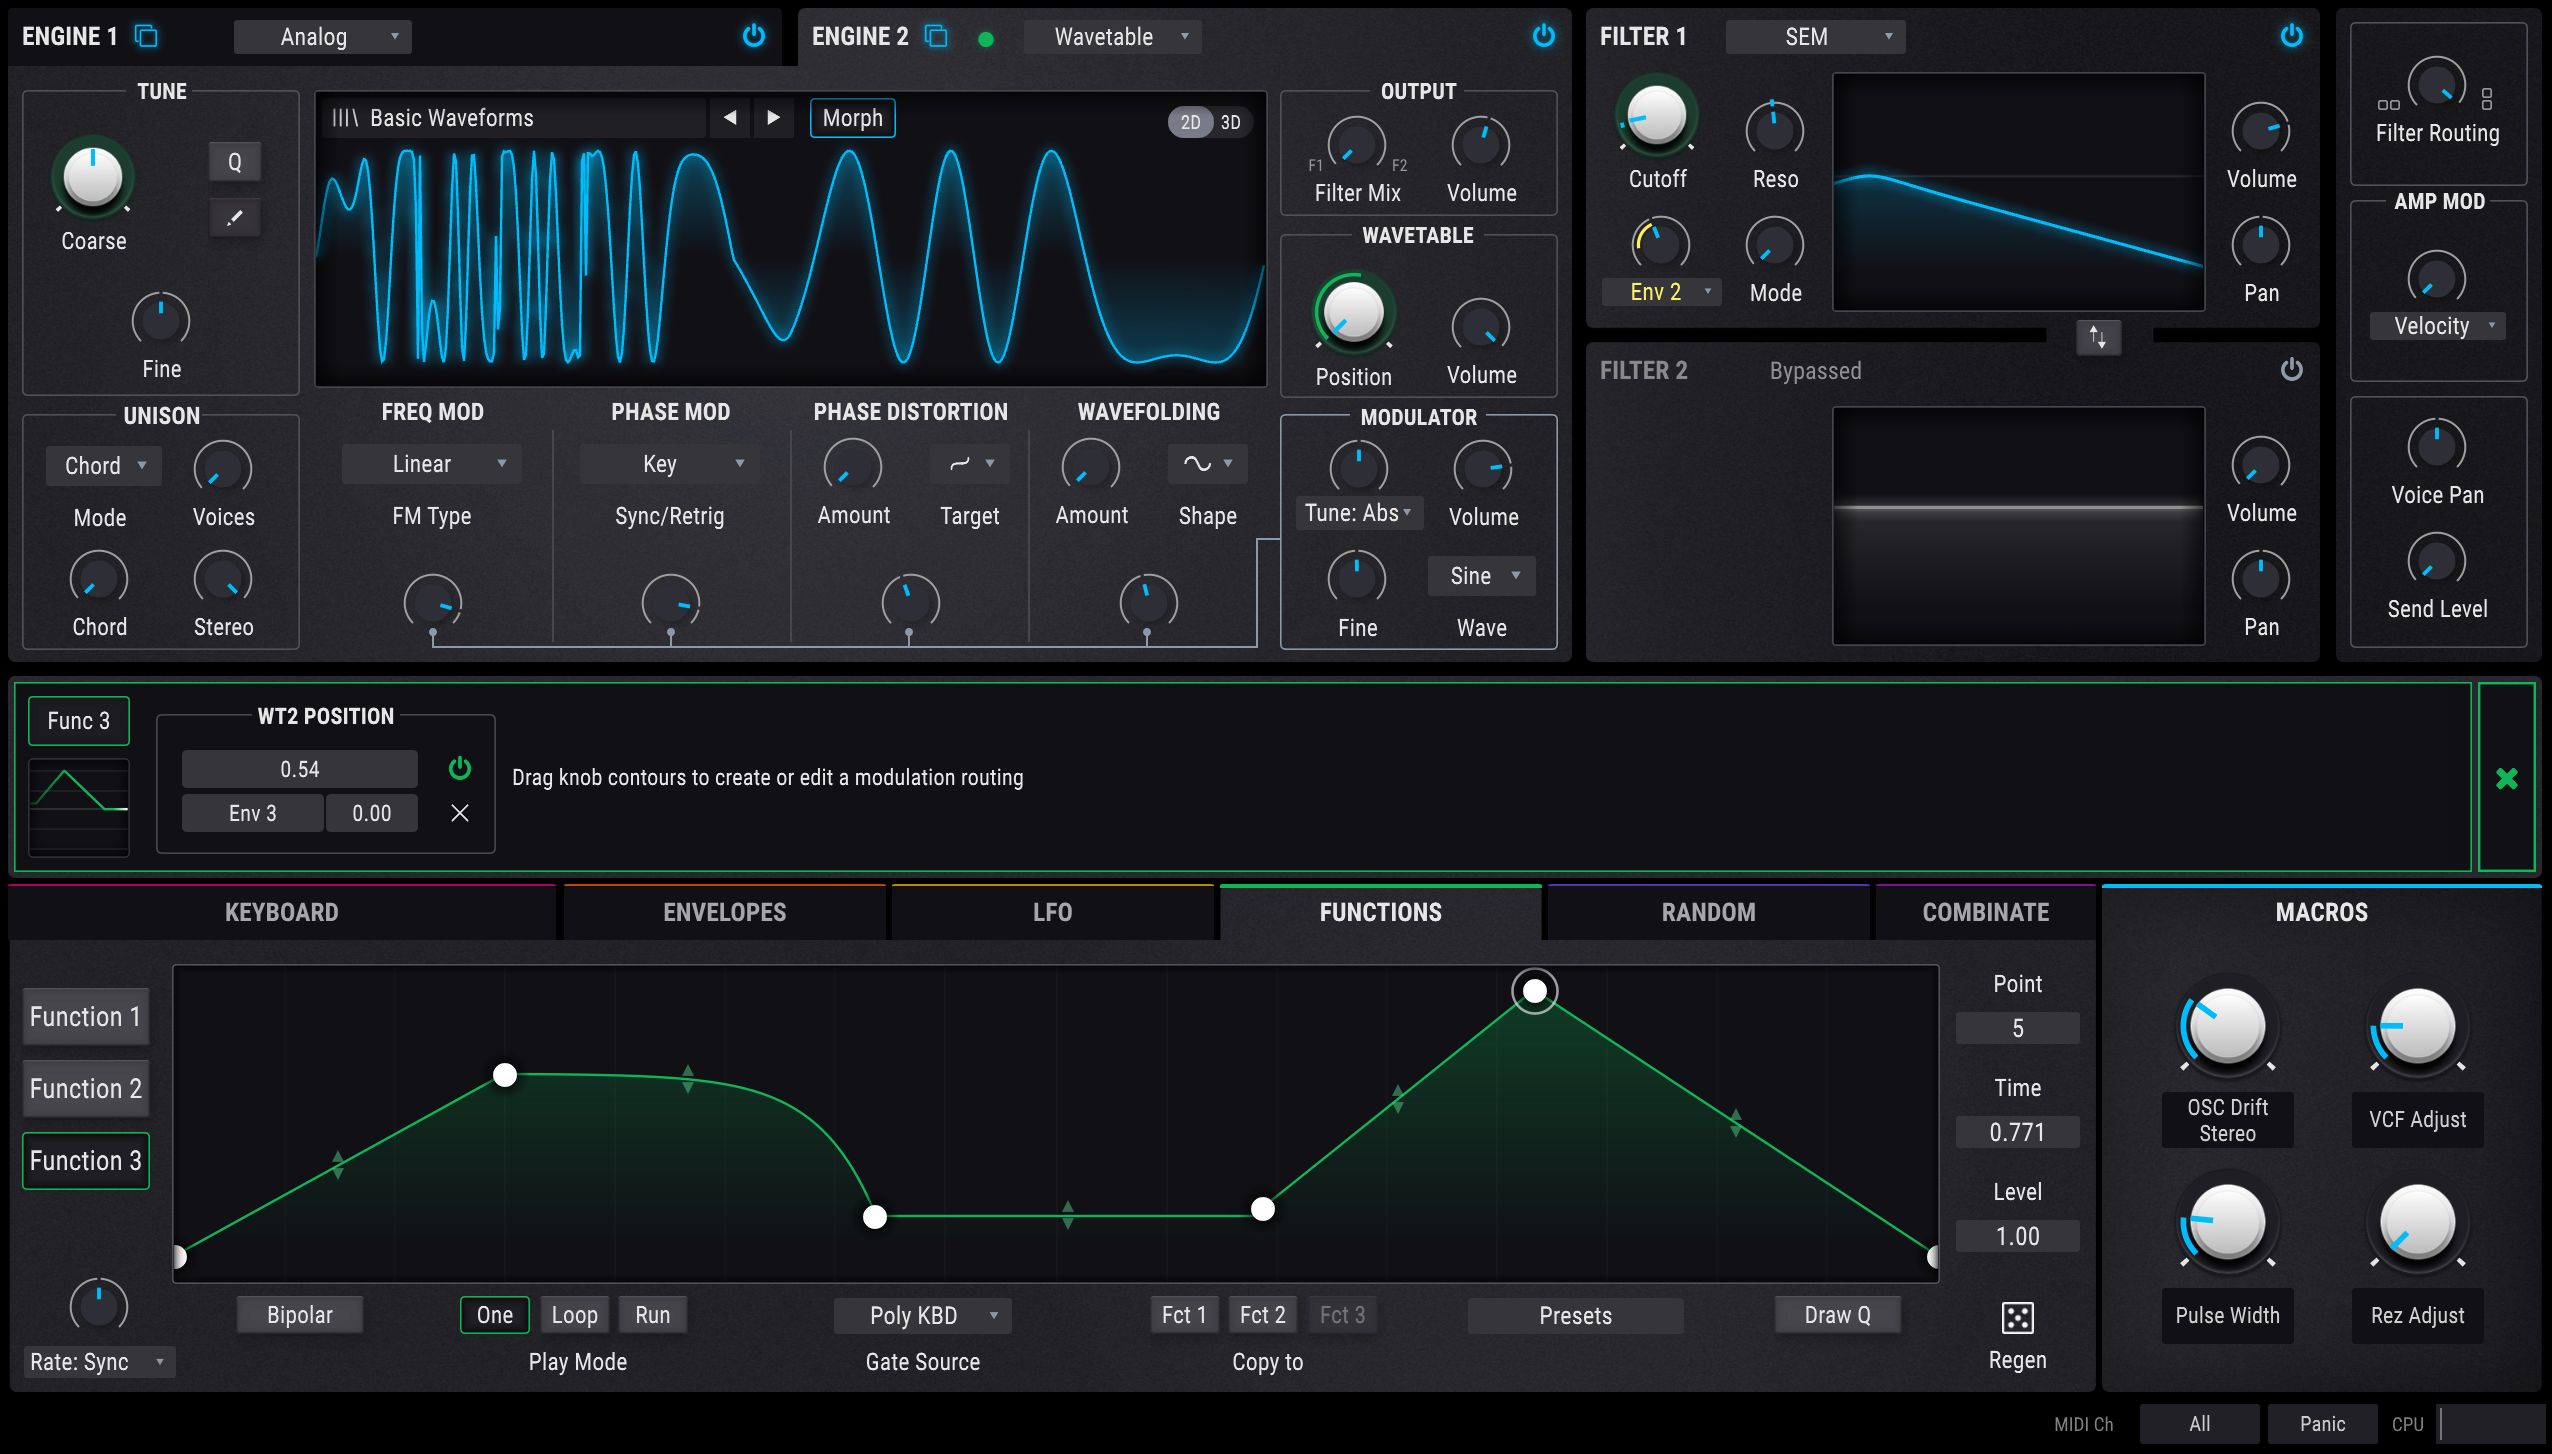 Function 3, customized, assigned to wavetable position, and sidechained to Envelope 3; you can save your own custom Function shapes via the Presets menu at bottom.  